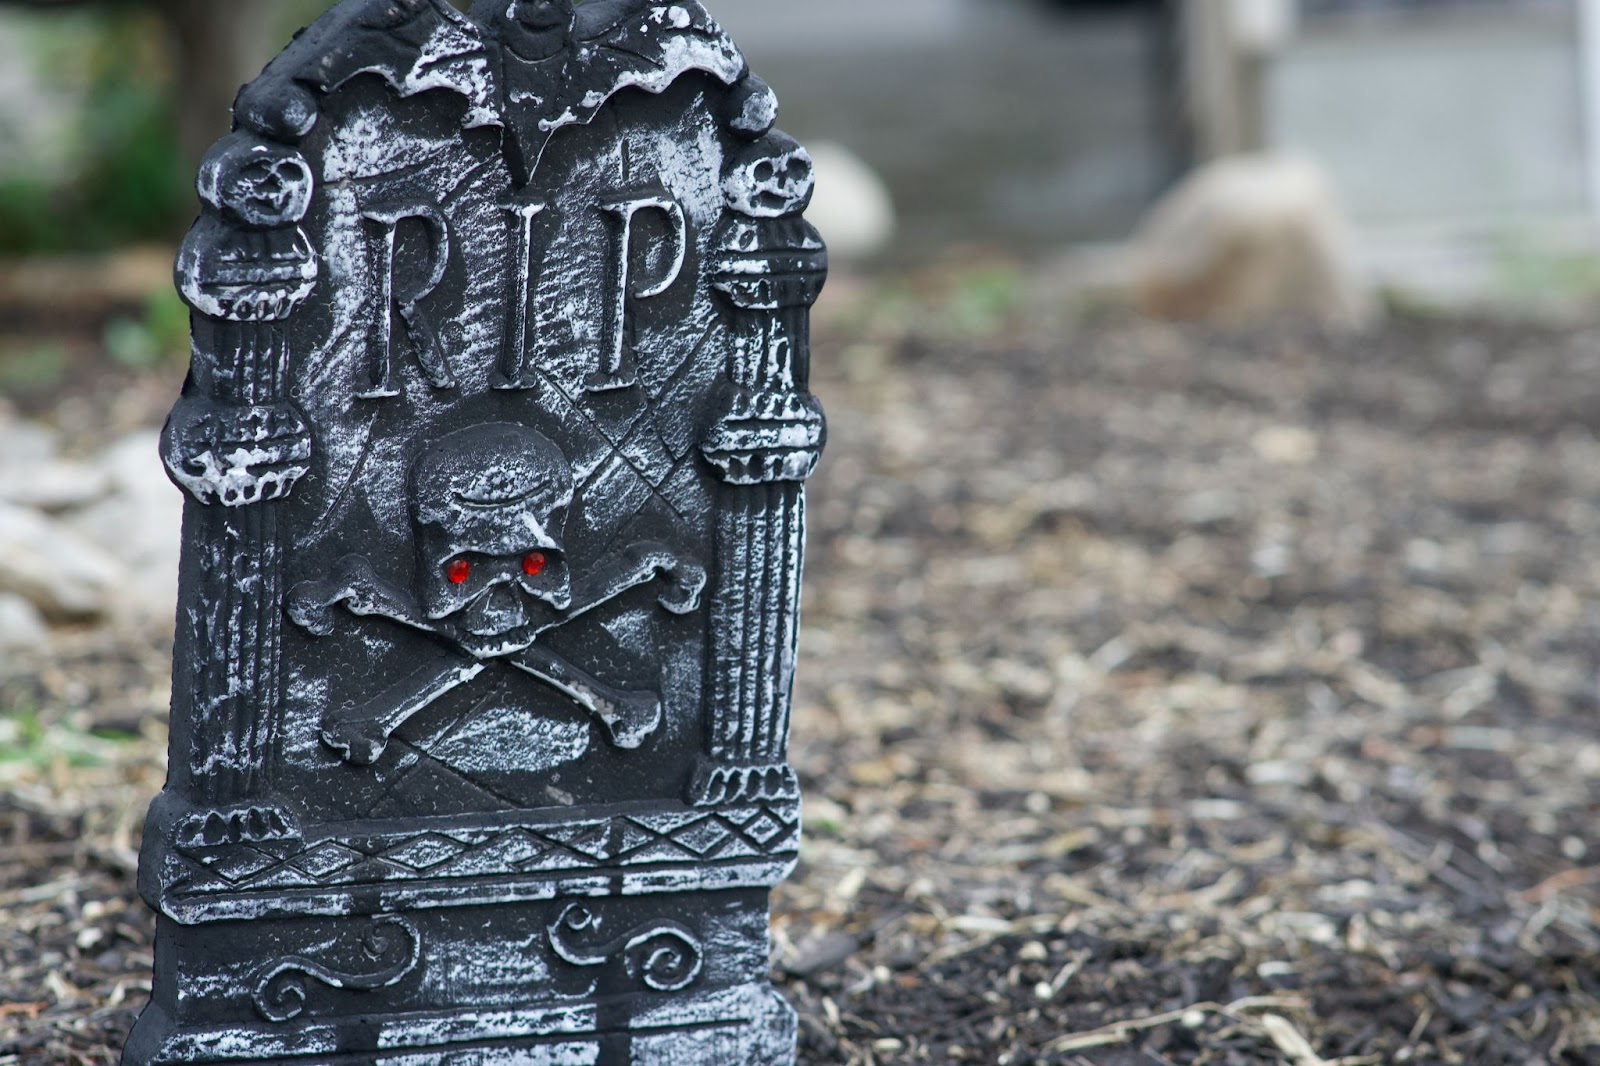 Novelty tombstone for Halloween 